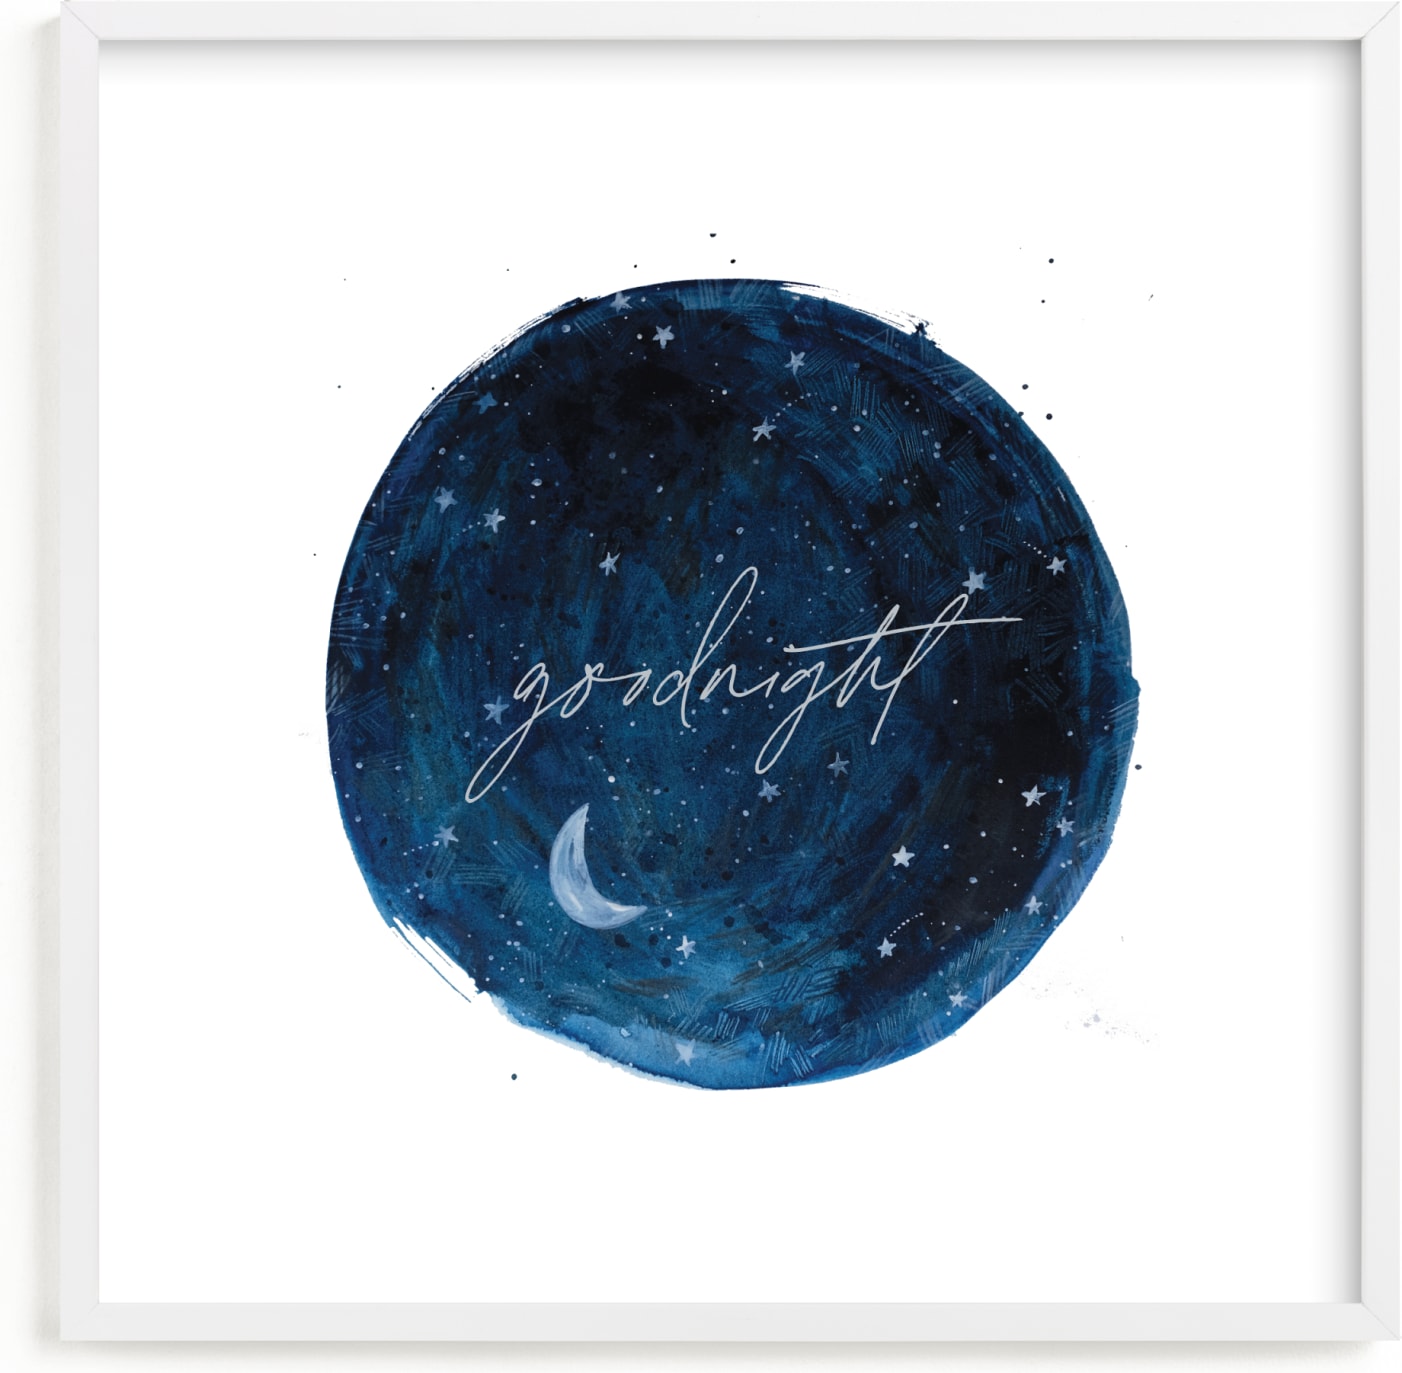 This is a blue nursery wall art by Krissy Bengtson called Constellations.